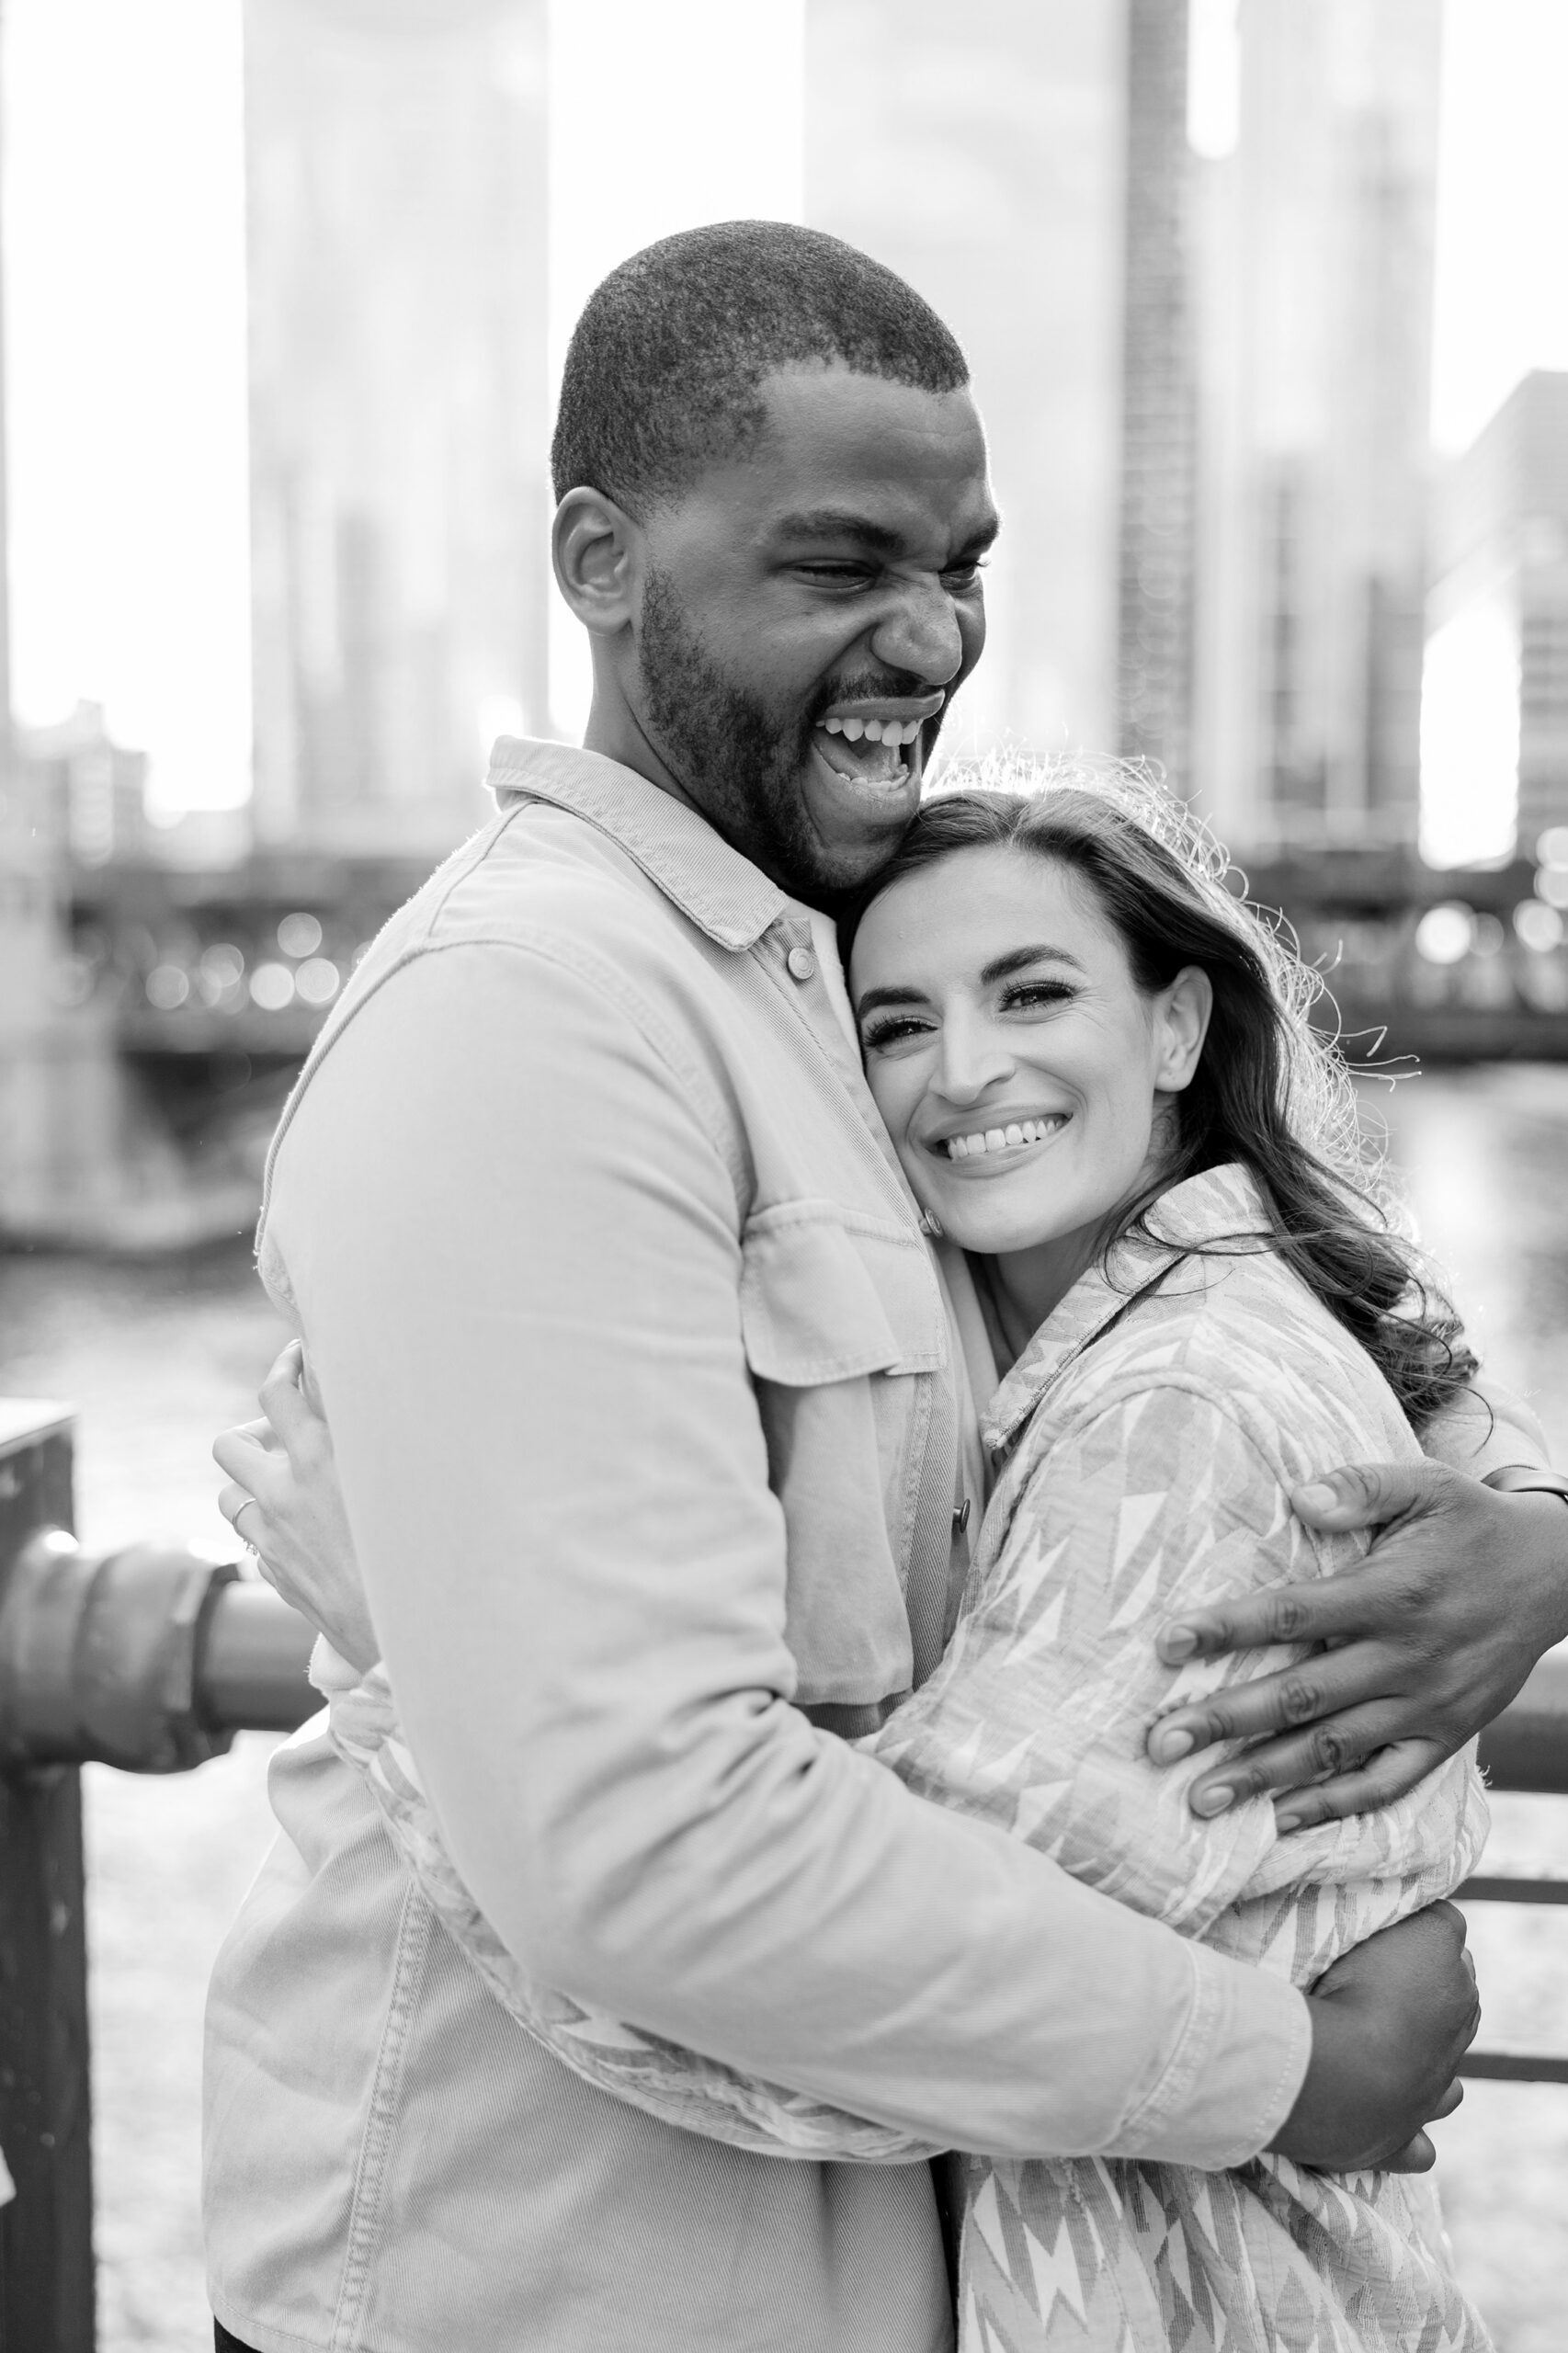 Man laughs and woman smiles during sunset engagement session in Chicago